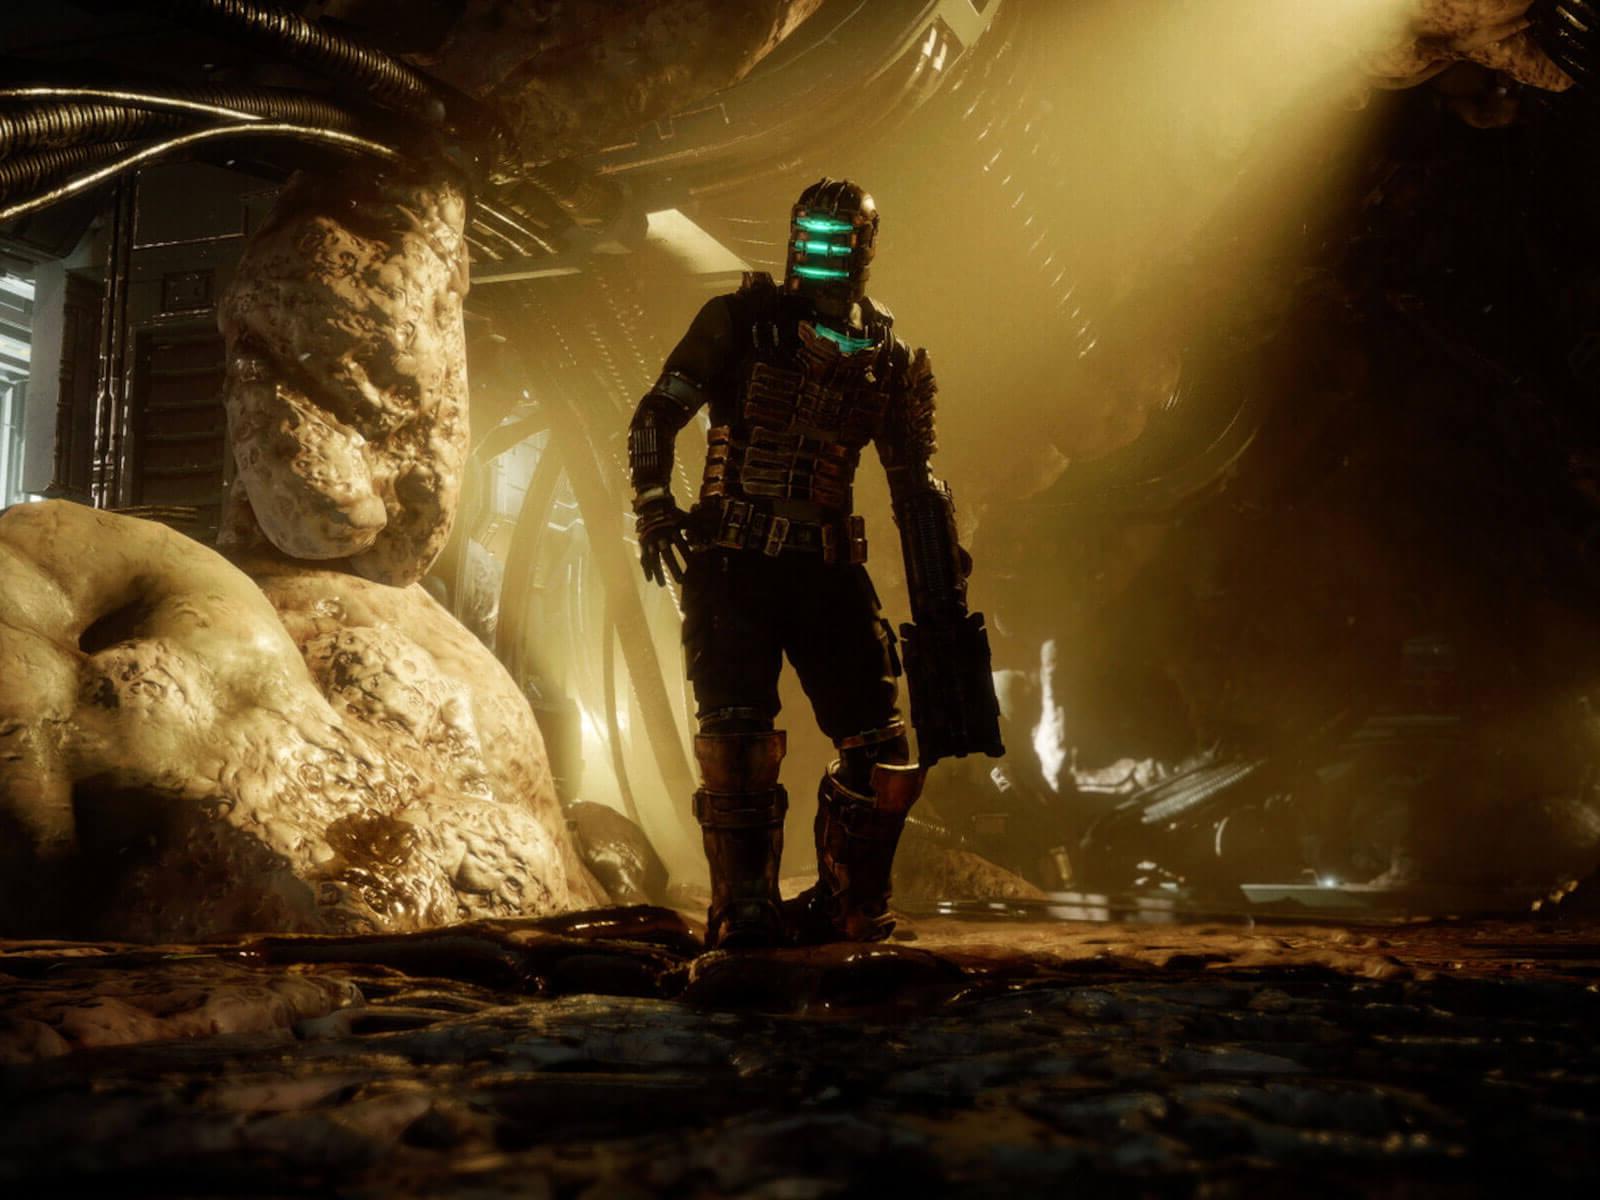 Dead Space protagonist Isaac Clarke stands in a dimly lit room with grotesque organic material growing over the floors, walls, and ceilings.